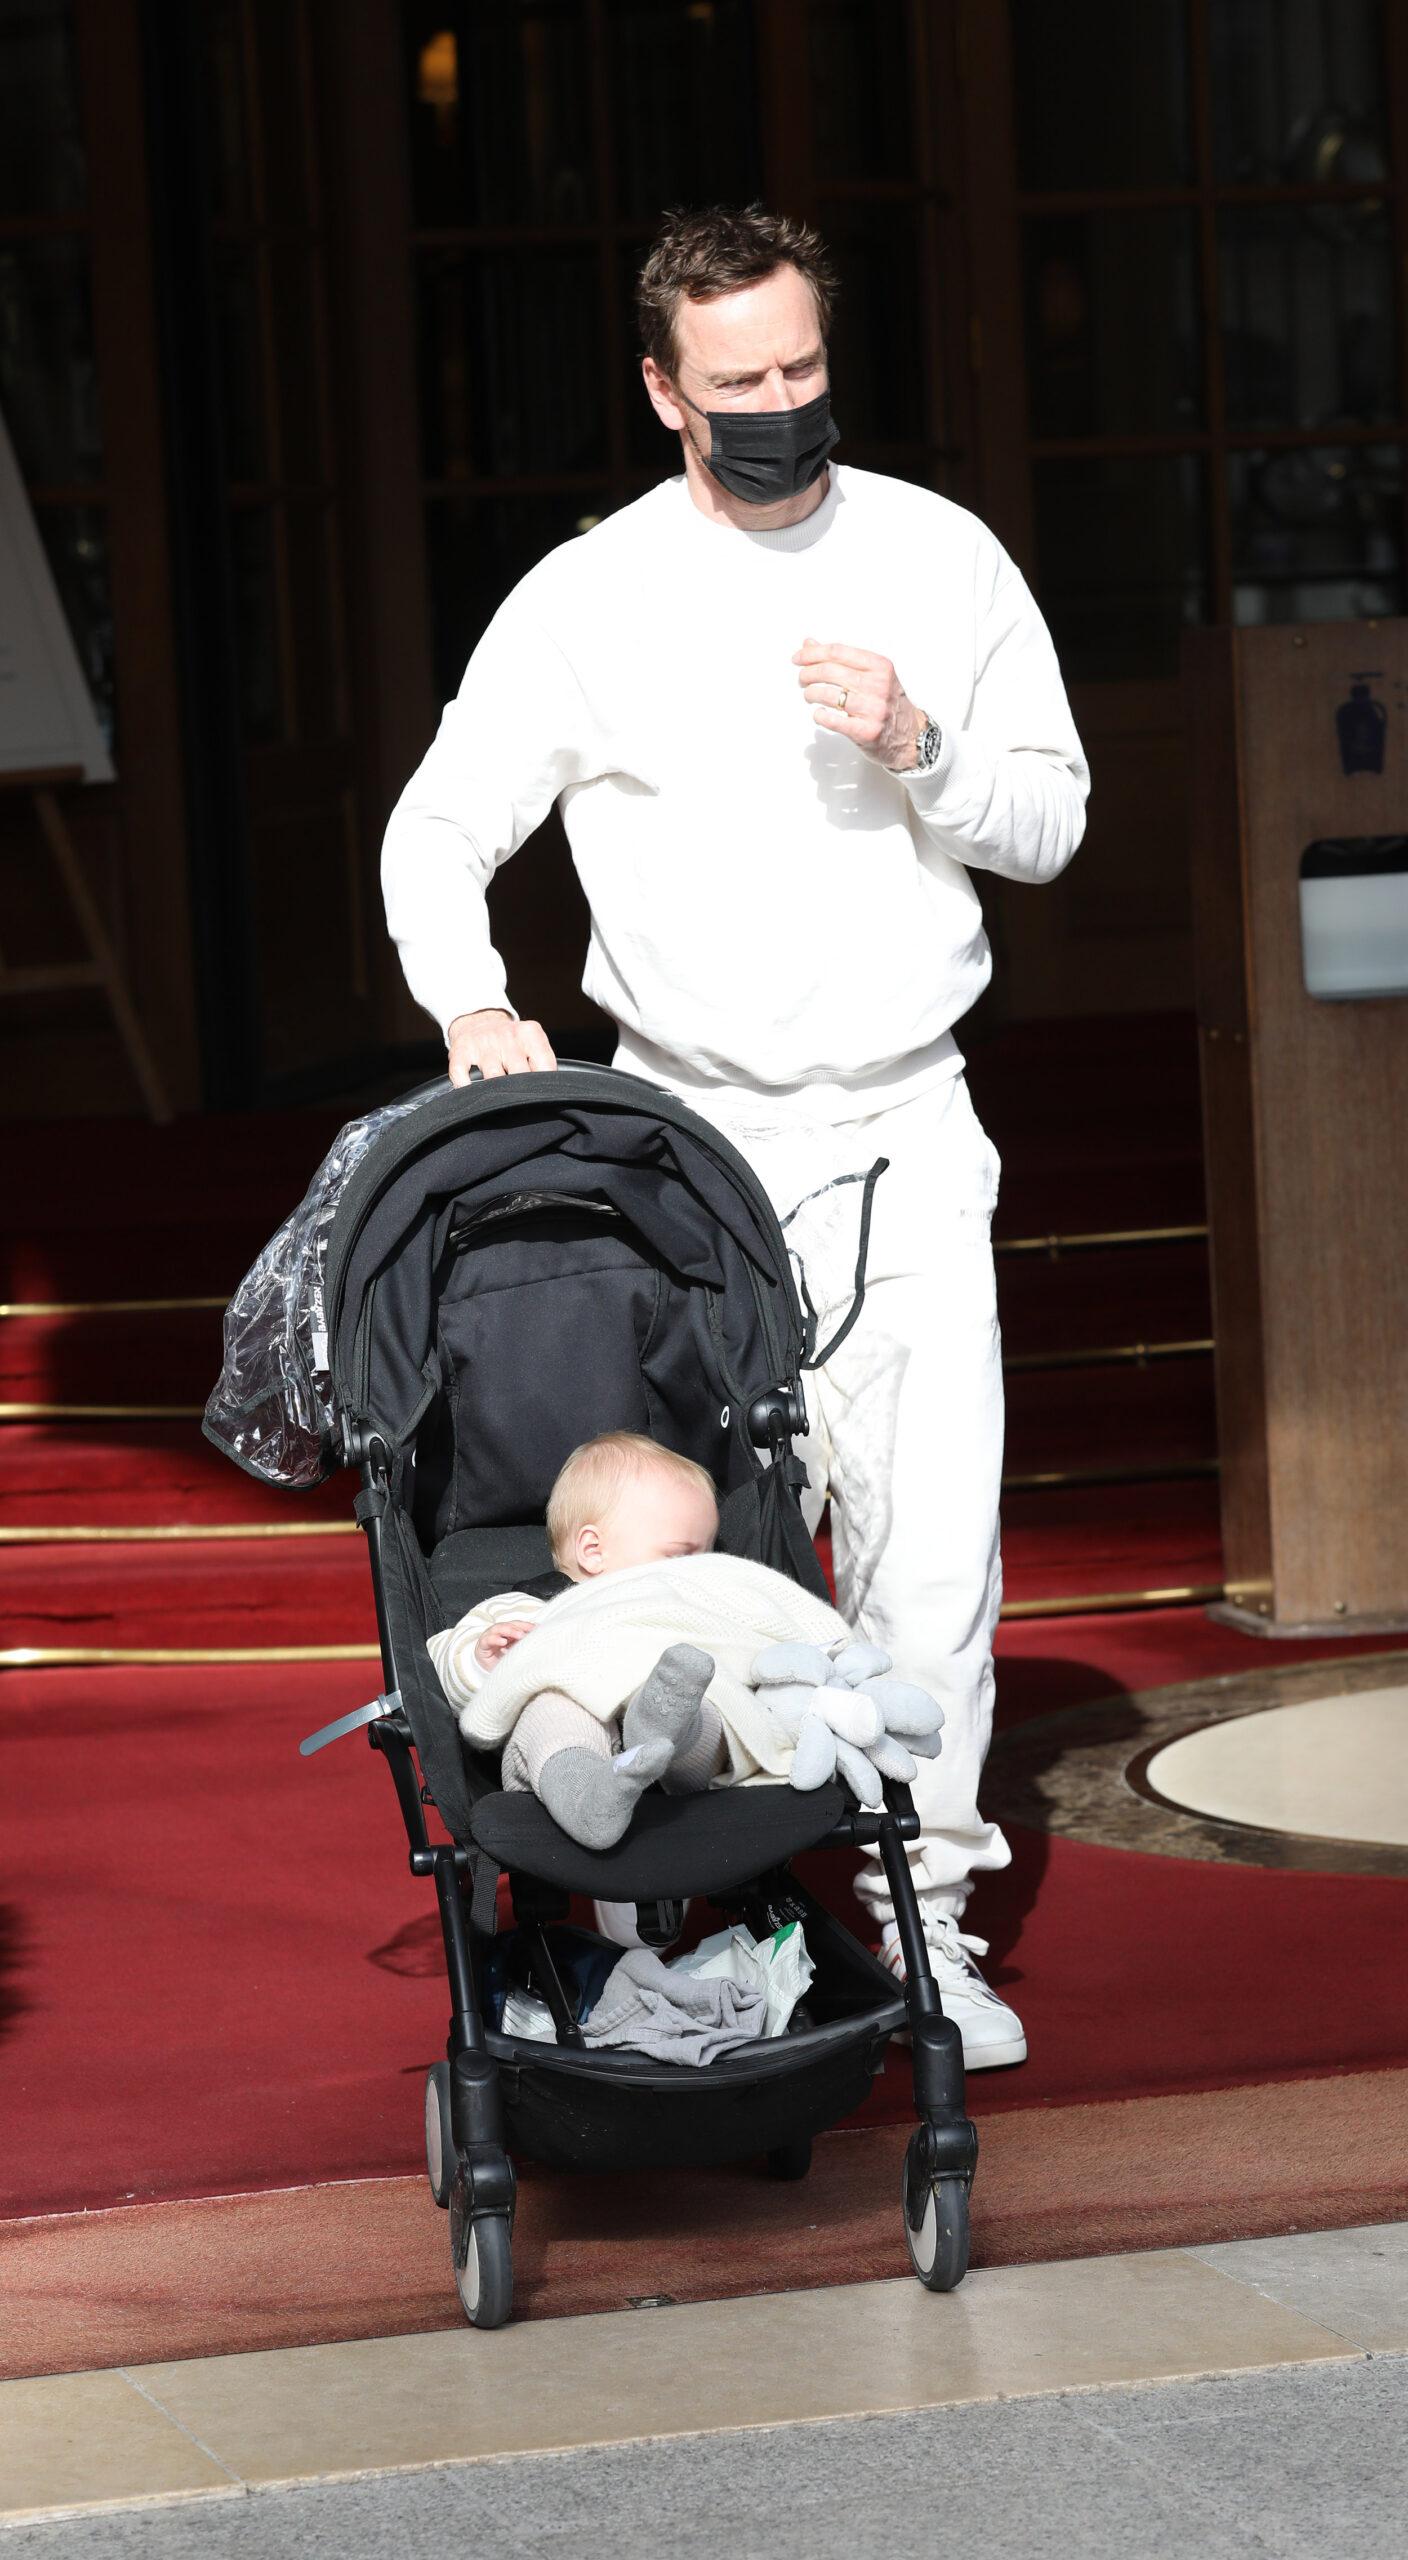 Michael Fassbender and his newborn baby in Paris during the Fashion Week